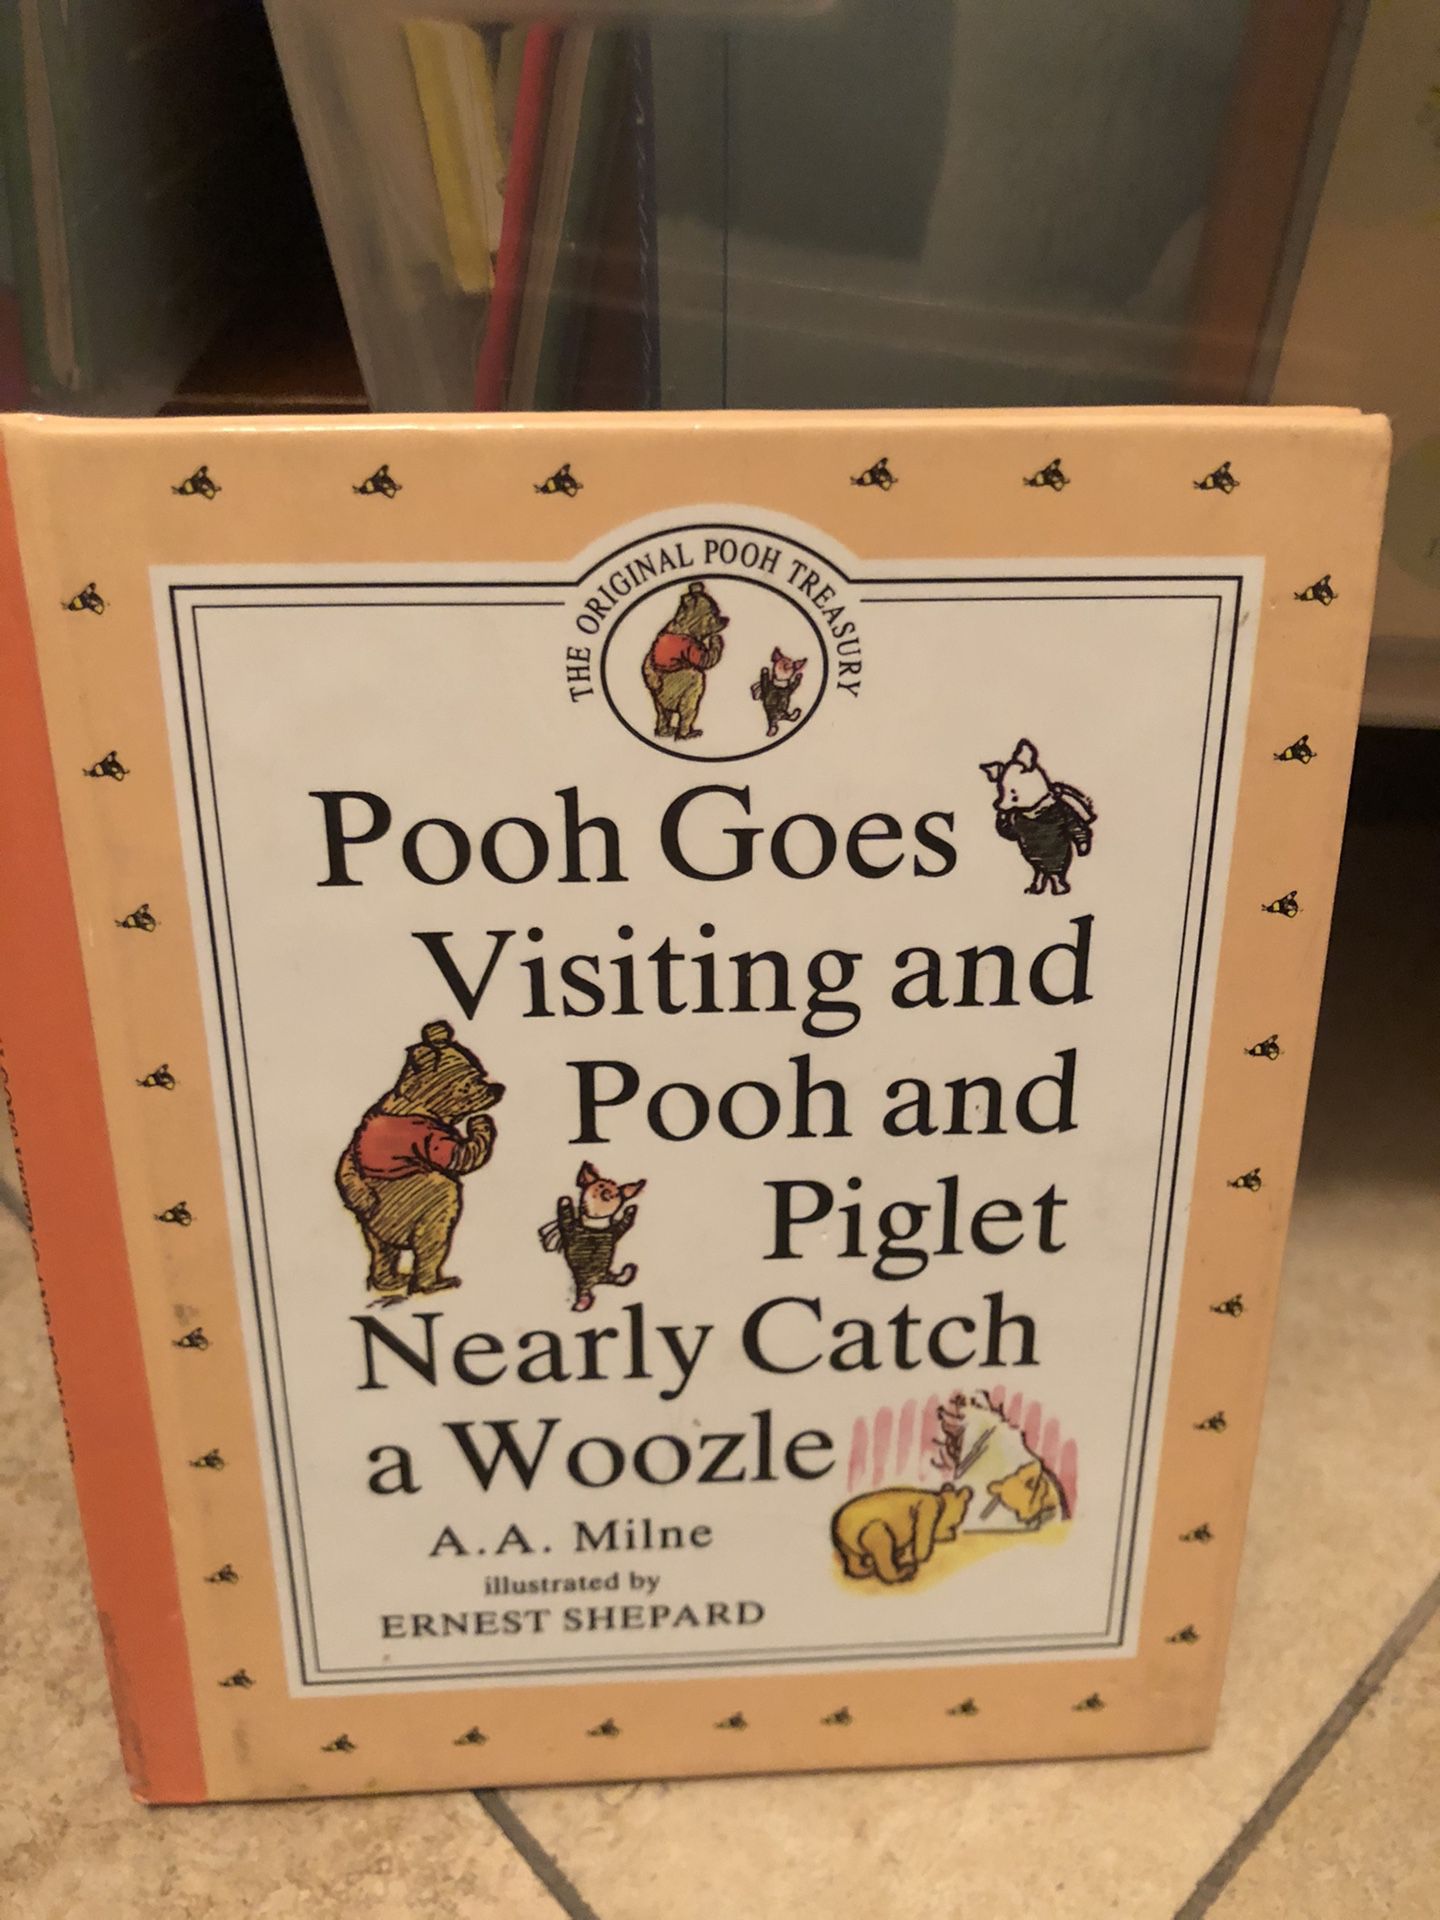 The original Winnie the Pooh treasury Disney vintage 1990 classic book Pooh goes visiting and Pooh and Piglet Nearly Catch a Woozle !